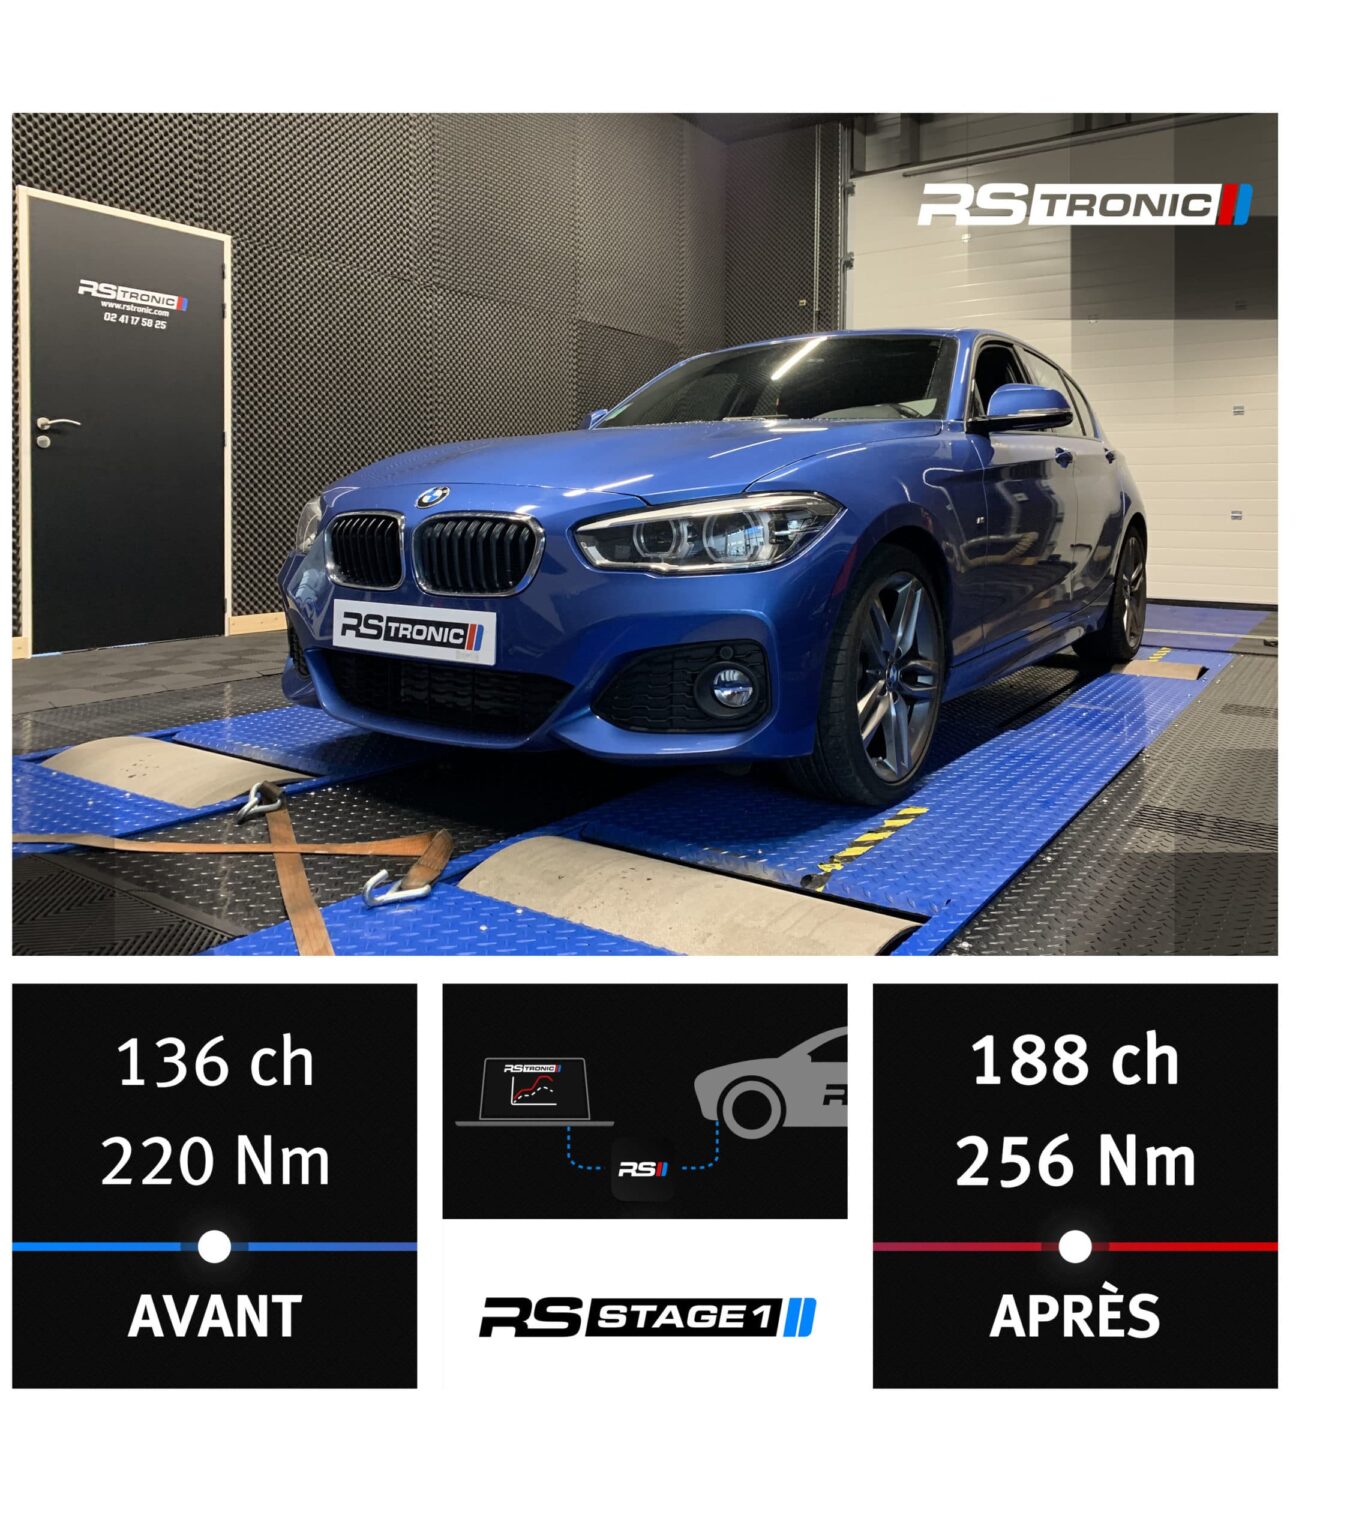 RS TRONIC ANGERS Preparateur Automobile BMW 118i F20 1.5T 136 STAGE 1 Scaled 1